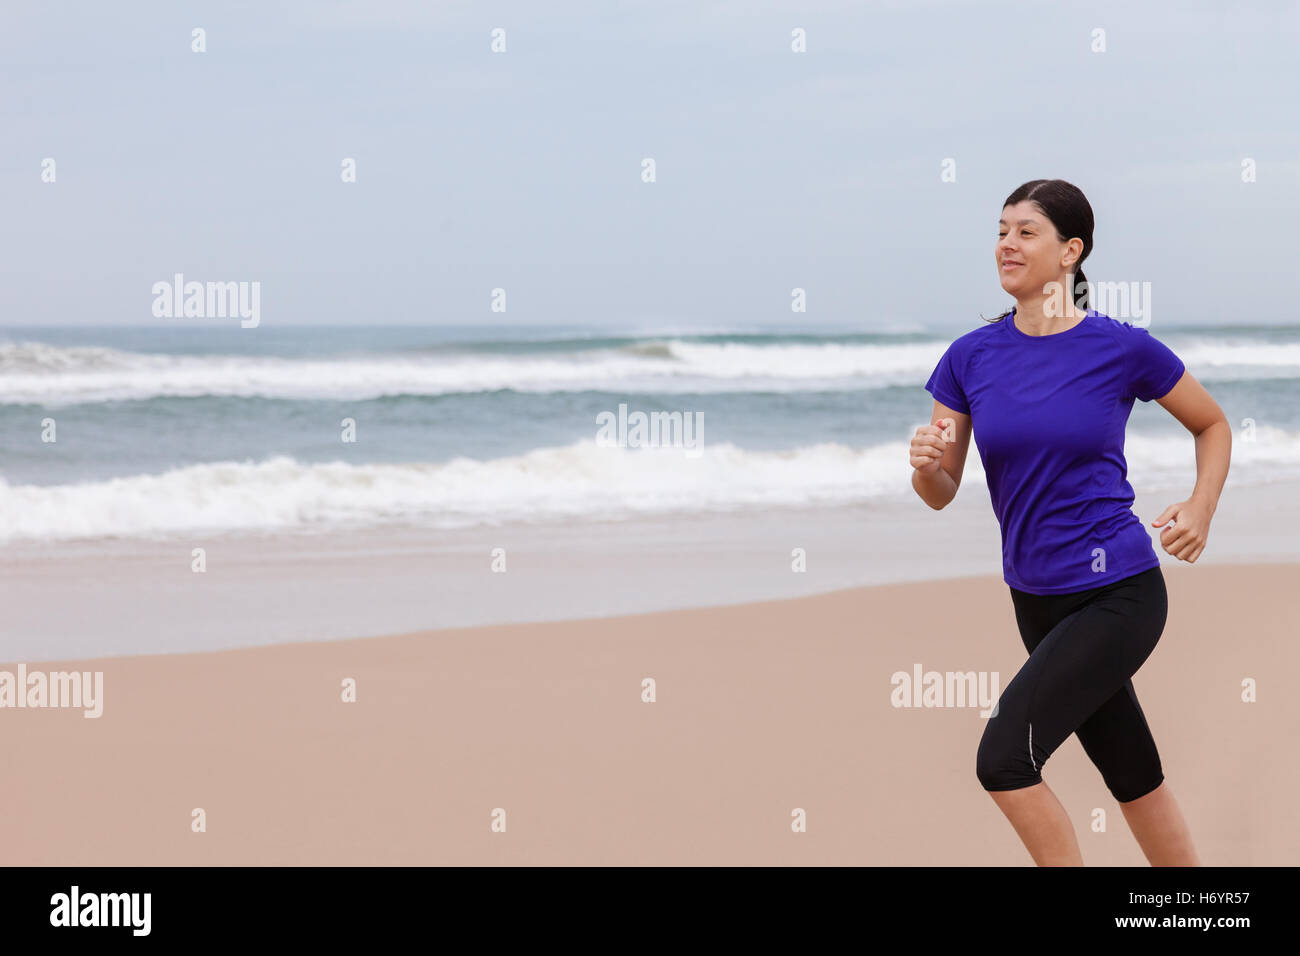 Female athlete running at the beach on an Autumn day. Stock Photo